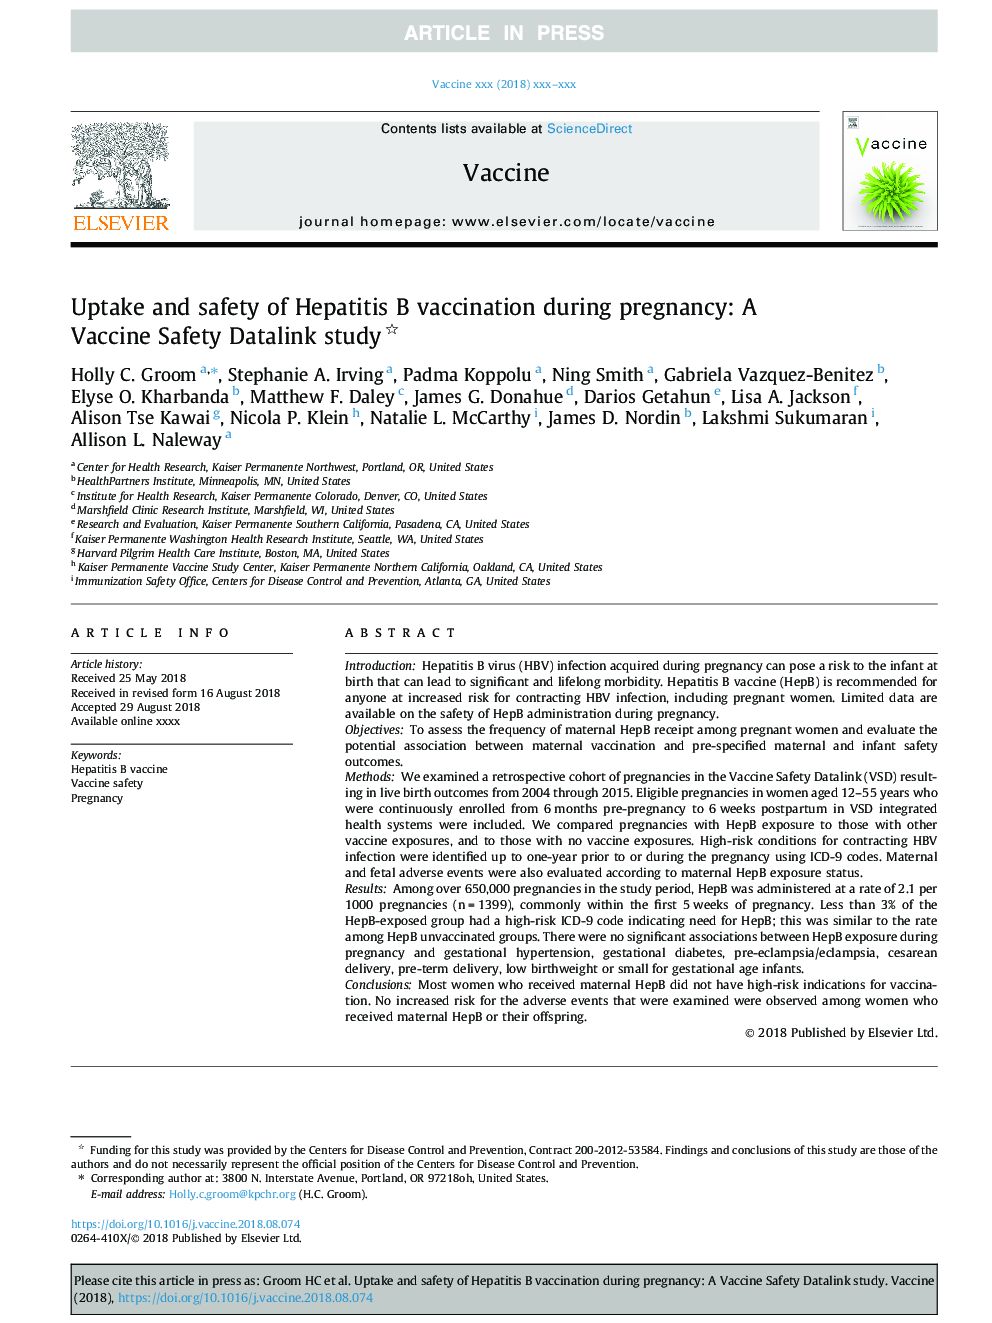 Uptake and safety of Hepatitis B vaccination during pregnancy: A Vaccine Safety Datalink study